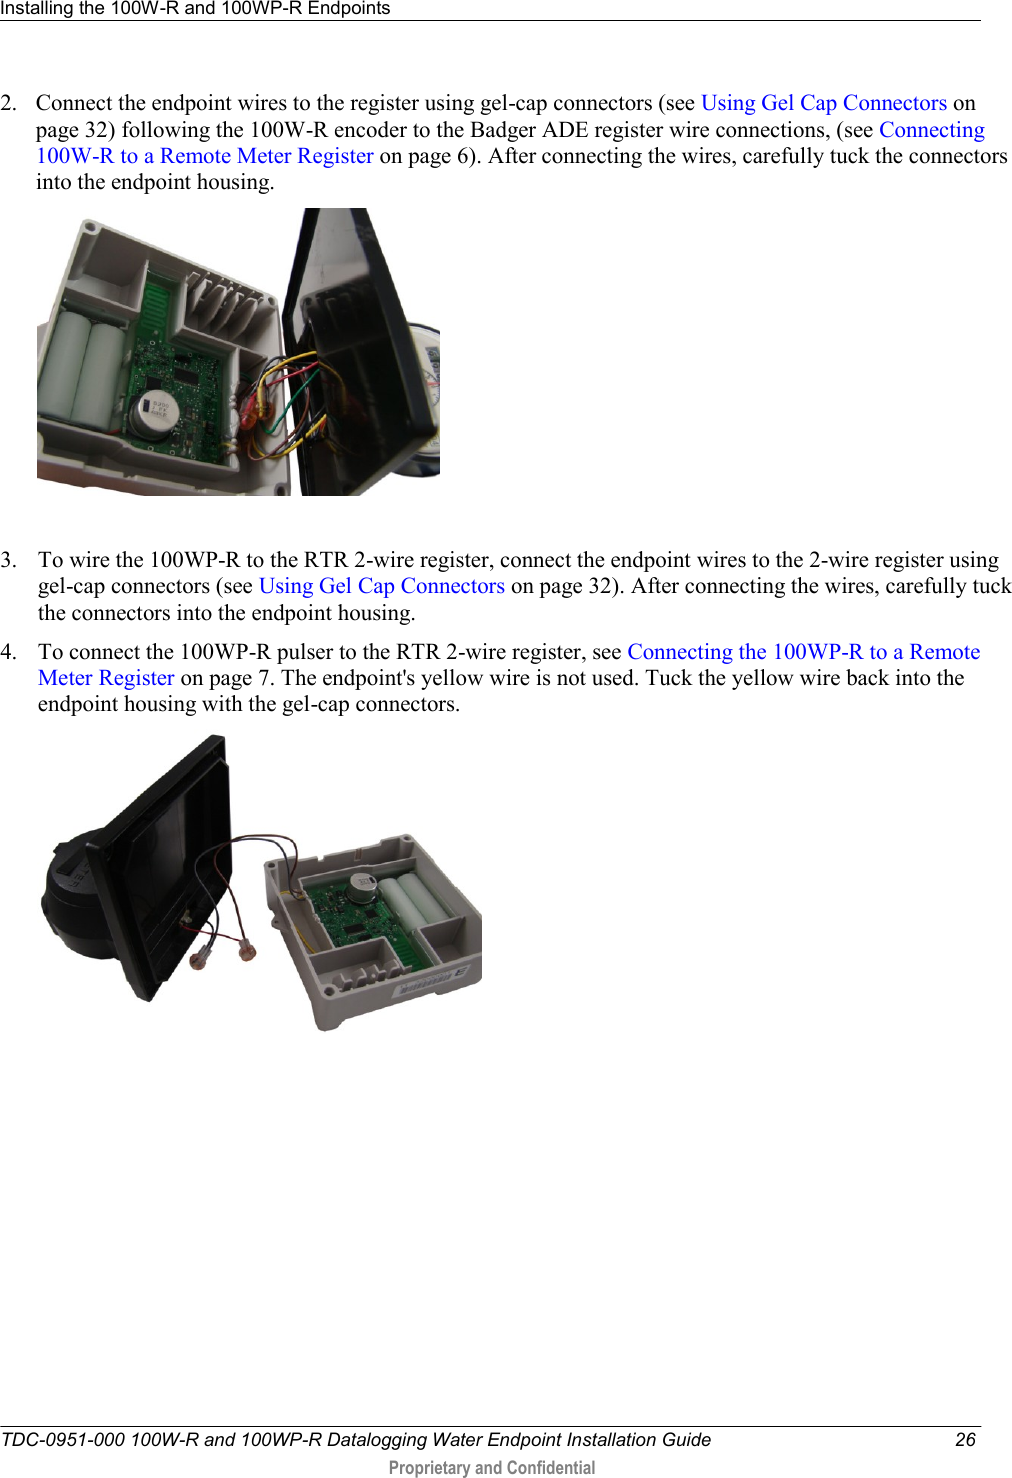 Installing the 100W-R and 100WP-R Endpoints   TDC-0951-000 100W-R and 100WP-R Datalogging Water Endpoint Installation Guide  26  Proprietary and Confidential    2. Connect the endpoint wires to the register using gel-cap connectors (see Using Gel Cap Connectors on page 32) following the 100W-R encoder to the Badger ADE register wire connections, (see Connecting 100W-R to a Remote Meter Register on page 6). After connecting the wires, carefully tuck the connectors into the endpoint housing.    3. To wire the 100WP-R to the RTR 2-wire register, connect the endpoint wires to the 2-wire register using gel-cap connectors (see Using Gel Cap Connectors on page 32). After connecting the wires, carefully tuck the connectors into the endpoint housing.  4. To connect the 100WP-R pulser to the RTR 2-wire register, see Connecting the 100WP-R to a Remote Meter Register on page 7. The endpoint&apos;s yellow wire is not used. Tuck the yellow wire back into the endpoint housing with the gel-cap connectors.   